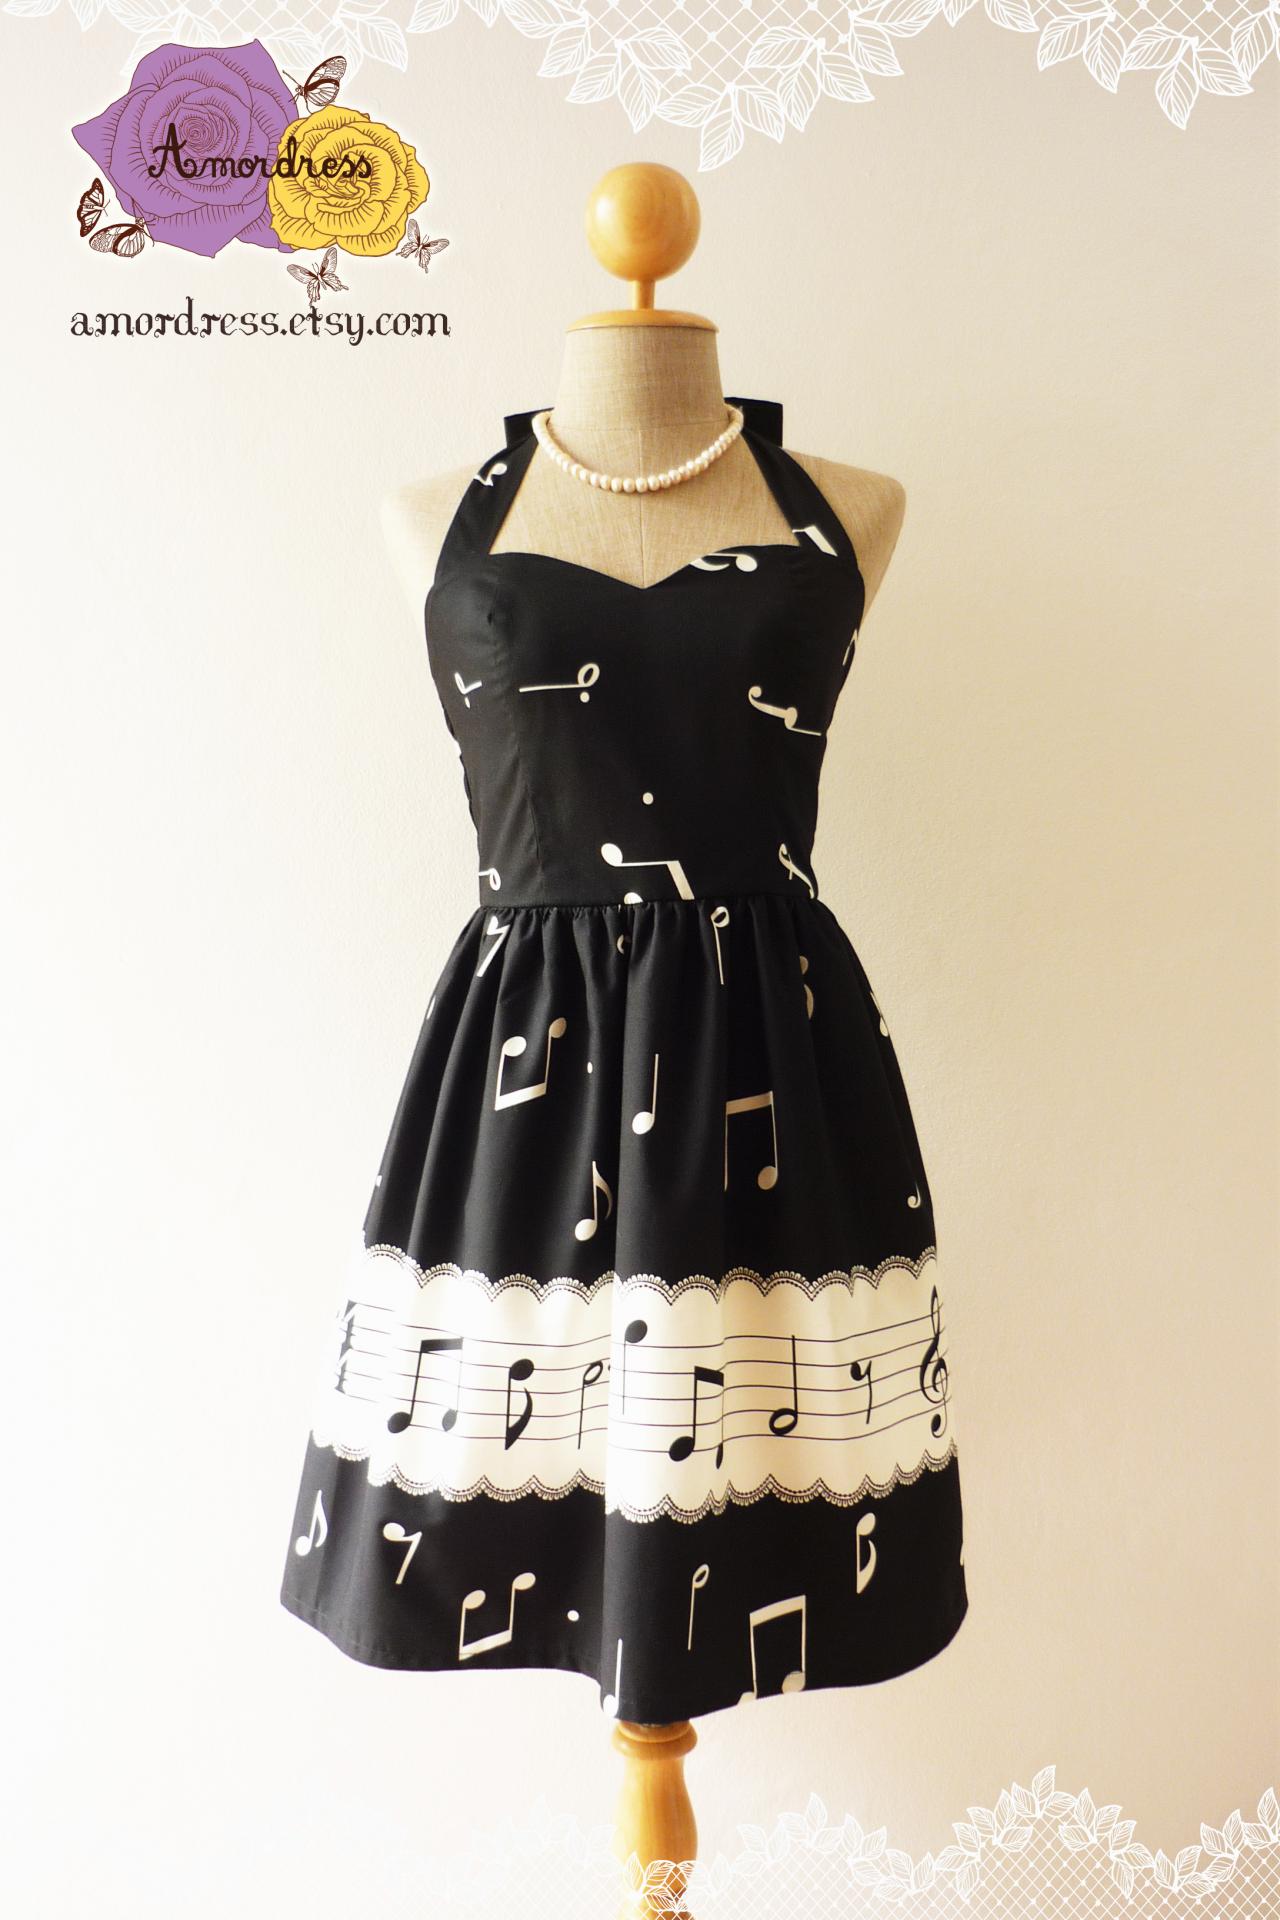 Music Lover Black Dress Retro Party Cocktail Bridesmaid Choir Birthday Concert Event Every Day Dress A Line Dress -size Xs,s,m,l,custom-